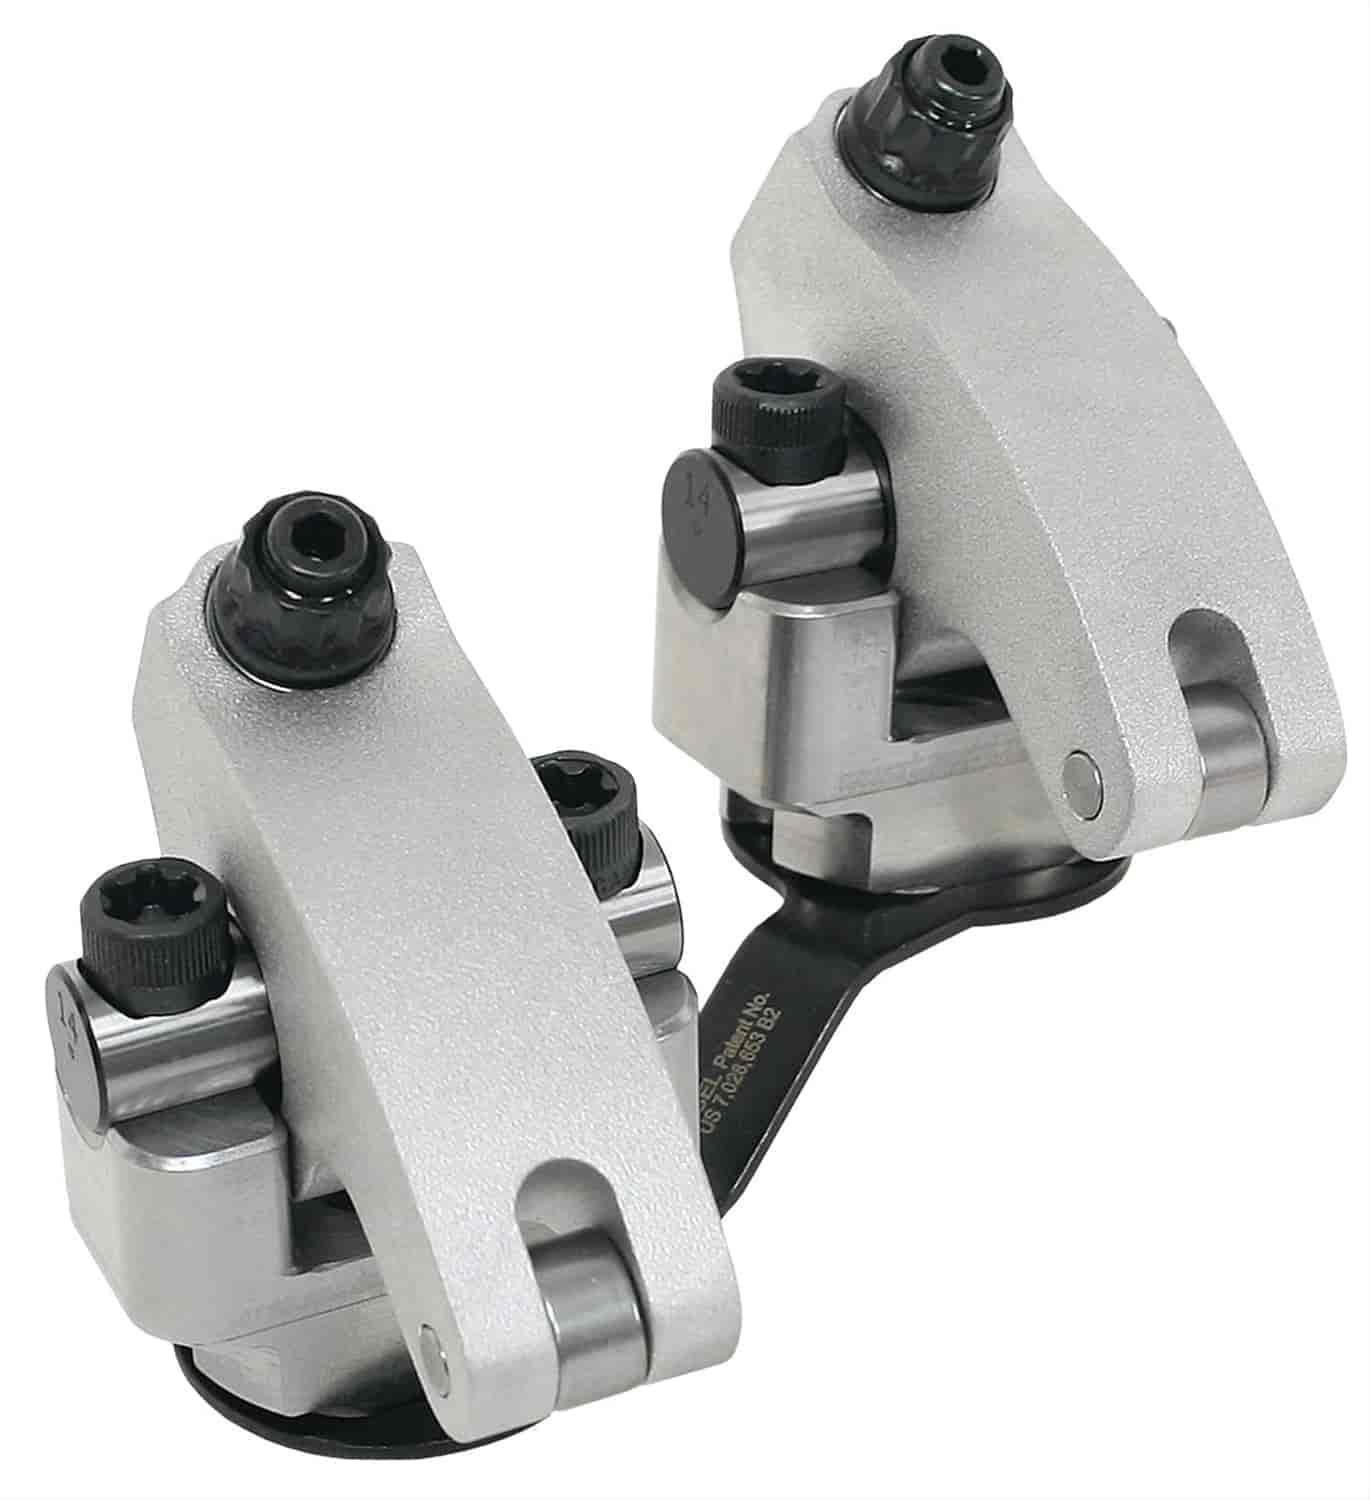 Series SS Shaft Mount Rockers Fits: Canfield 24.5-800 Series World Products Merlin/Aluminum Rocker Ratio: 1.75 IN / 1.70 EX